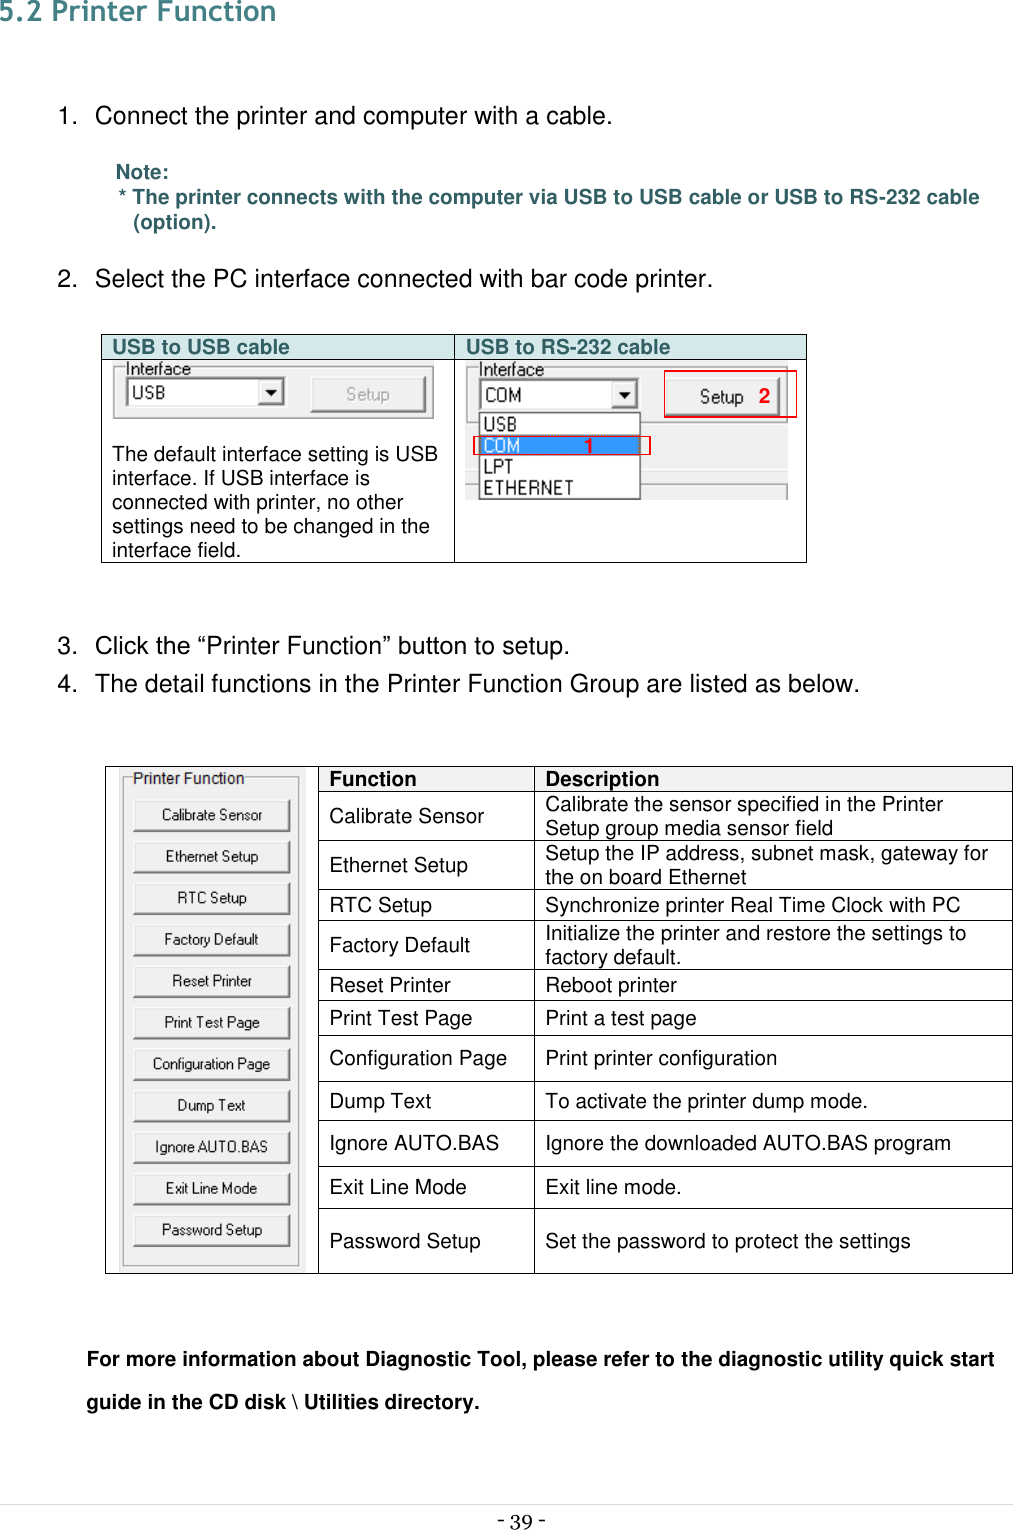  - 39 -  5.2 Printer Function  1.  Connect the printer and computer with a cable.  Note: * The printer connects with the computer via USB to USB cable or USB to RS-232 cable (option).  2.  Select the PC interface connected with bar code printer.  USB to USB cable USB to RS-232 cable   The default interface setting is USB interface. If USB interface is connected with printer, no other settings need to be changed in the interface field.   3. Click the “Printer Function” button to setup. 4.  The detail functions in the Printer Function Group are listed as below.   Function Description Calibrate Sensor Calibrate the sensor specified in the Printer Setup group media sensor field Ethernet Setup Setup the IP address, subnet mask, gateway for the on board Ethernet RTC Setup Synchronize printer Real Time Clock with PC Factory Default Initialize the printer and restore the settings to factory default. Reset Printer Reboot printer Print Test Page Print a test page Configuration Page Print printer configuration Dump Text To activate the printer dump mode. Ignore AUTO.BAS Ignore the downloaded AUTO.BAS program Exit Line Mode Exit line mode. Password Setup Set the password to protect the settings  For more information about Diagnostic Tool, please refer to the diagnostic utility quick start guide in the CD disk \ Utilities directory.   1 2 